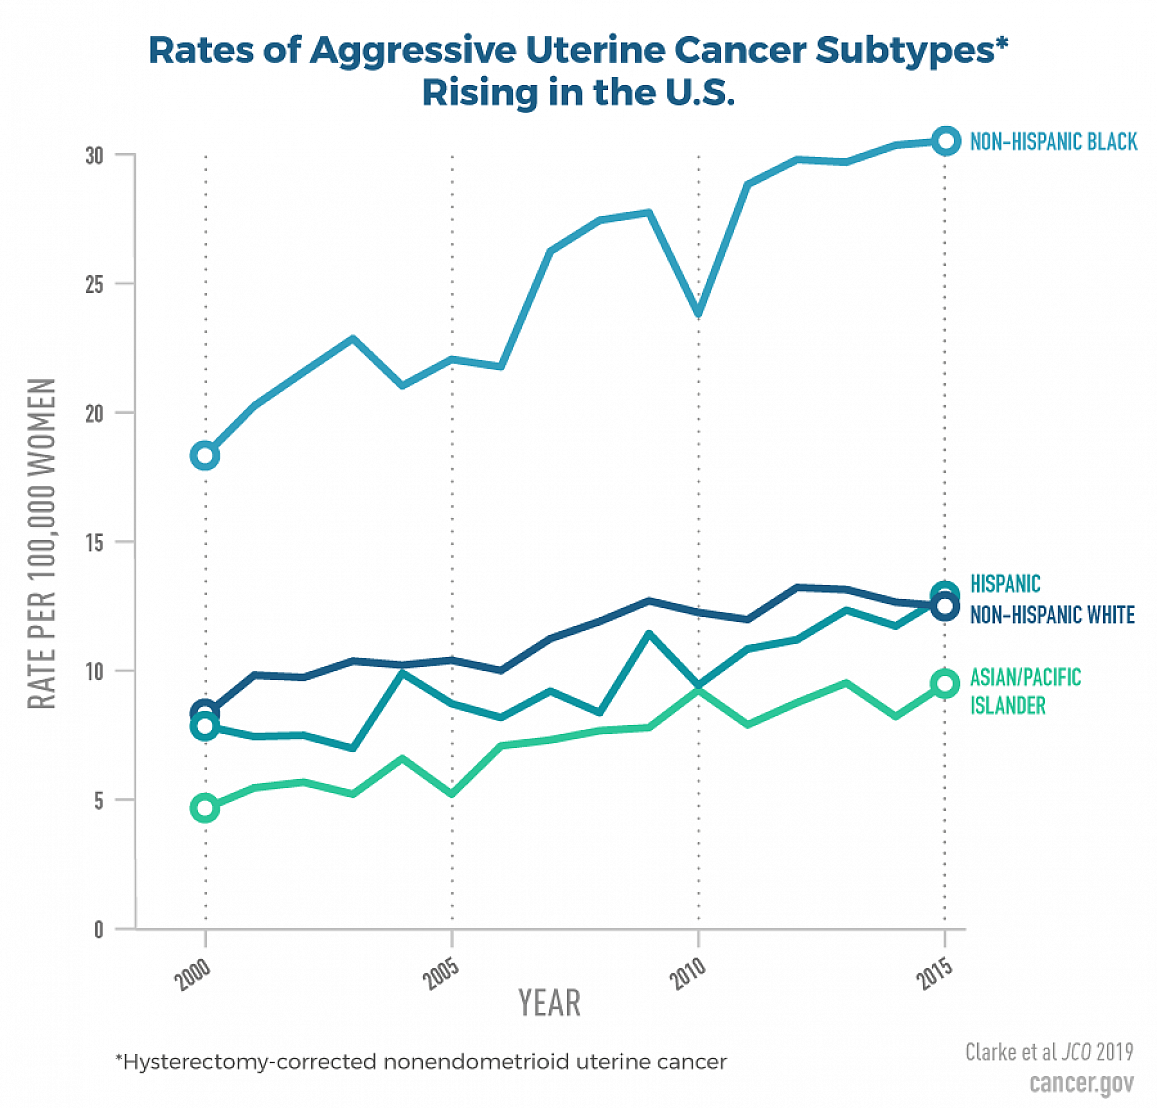 line graph showing rates of aggressive uterine cancer subtypes rising in the U.S.